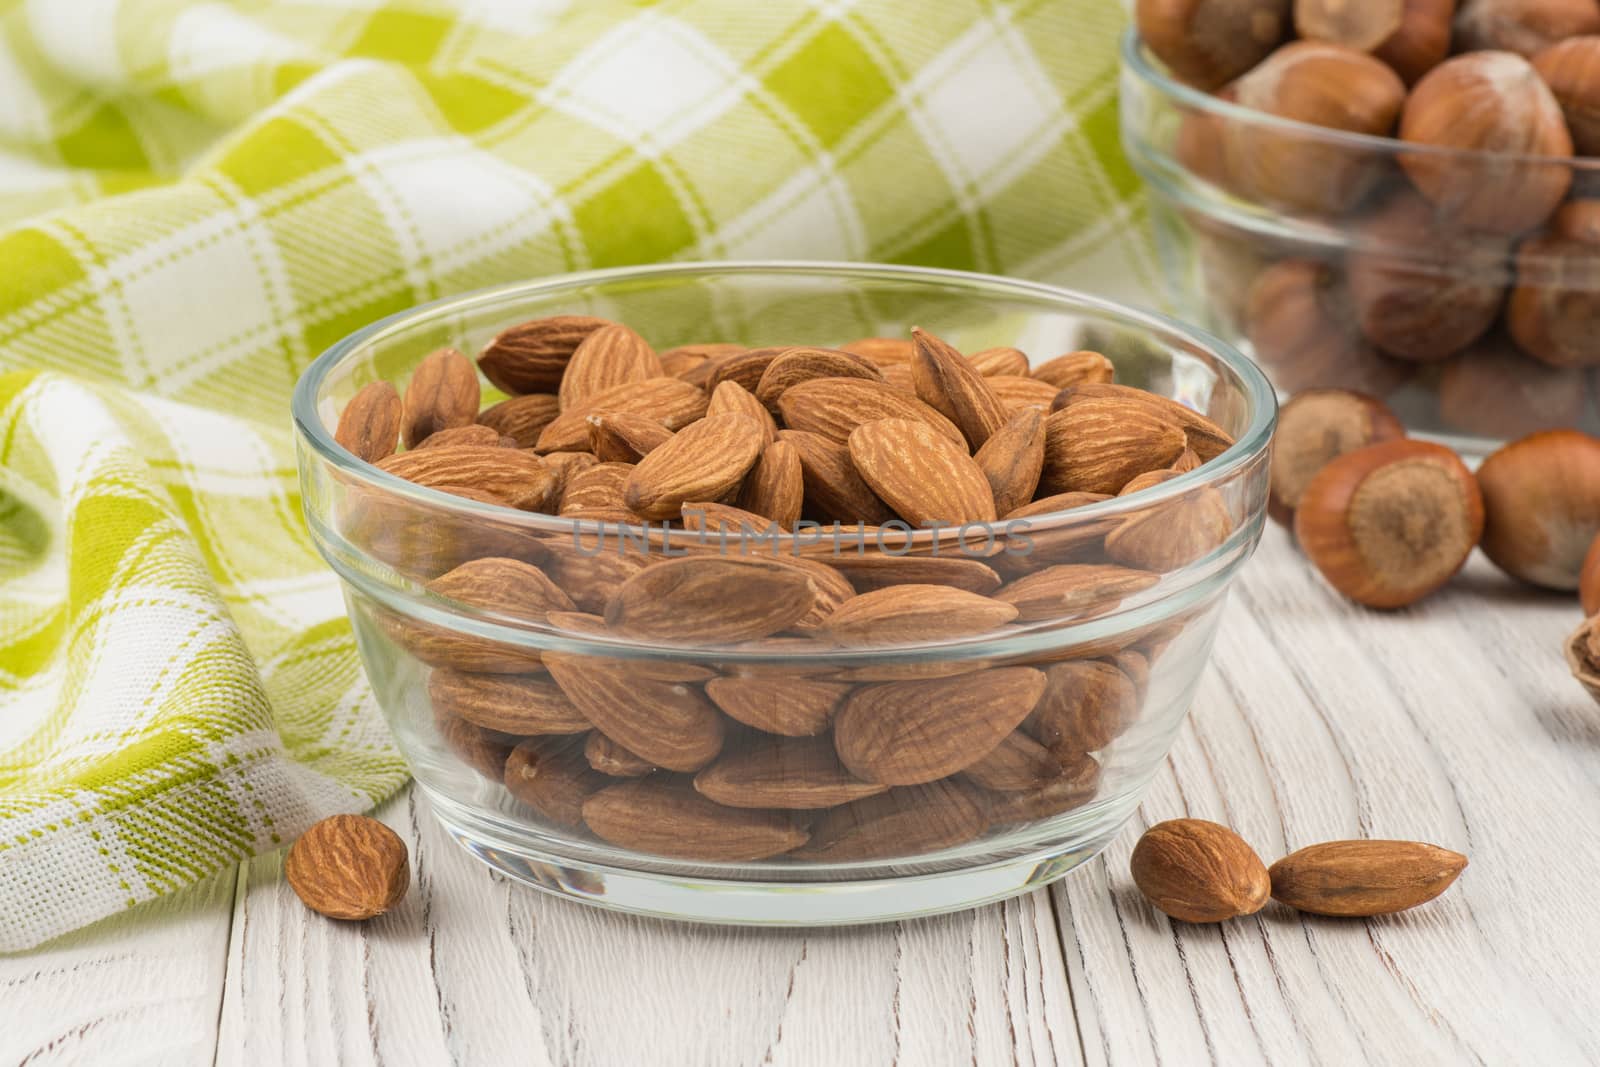 Almonds in a glass bowl on the old wooden table. Selective focus.